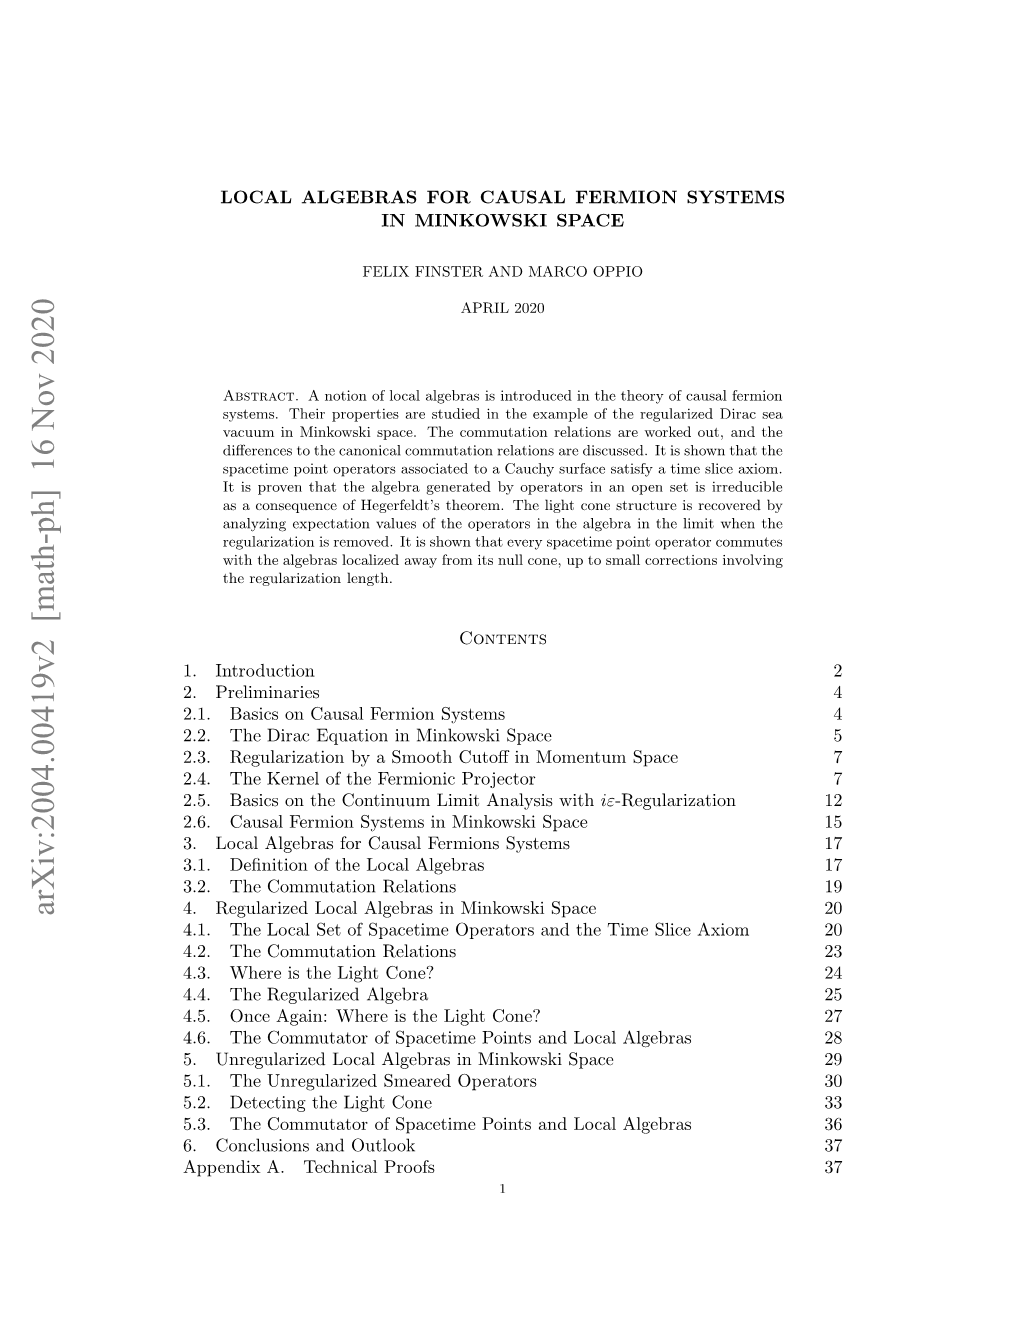 Local Algebras for Causal Fermion Systems in Minkowski Space